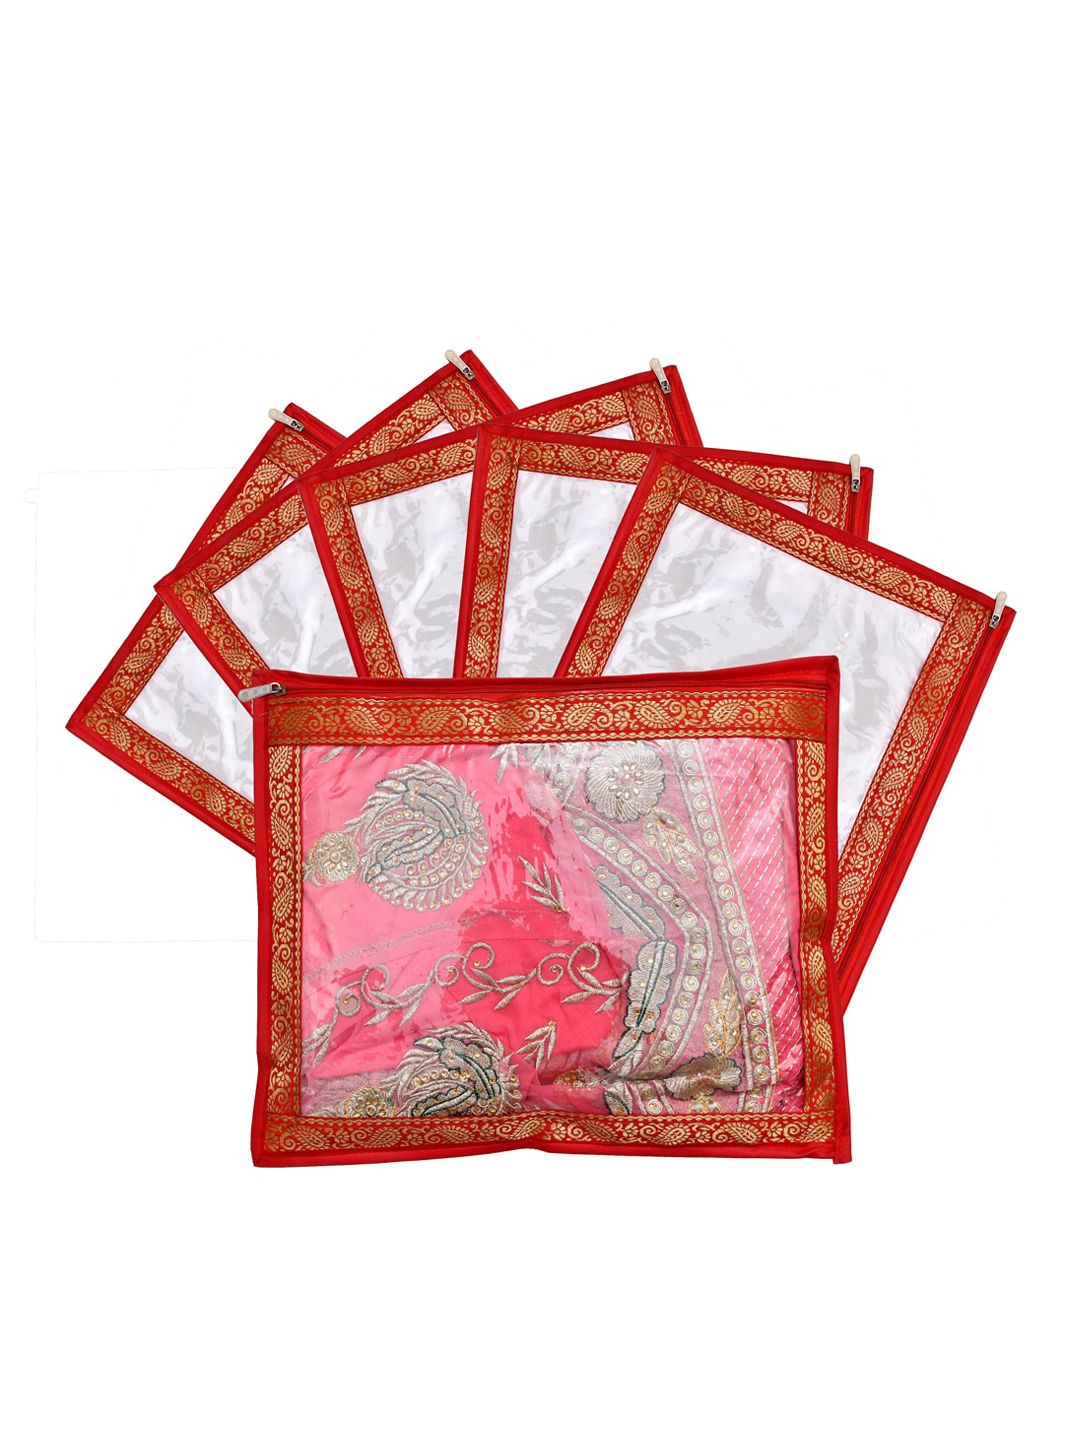 Kuber Industries Set Of 6 Red & Transparent Solid Single Packing Saree Cover Organizers Price in India